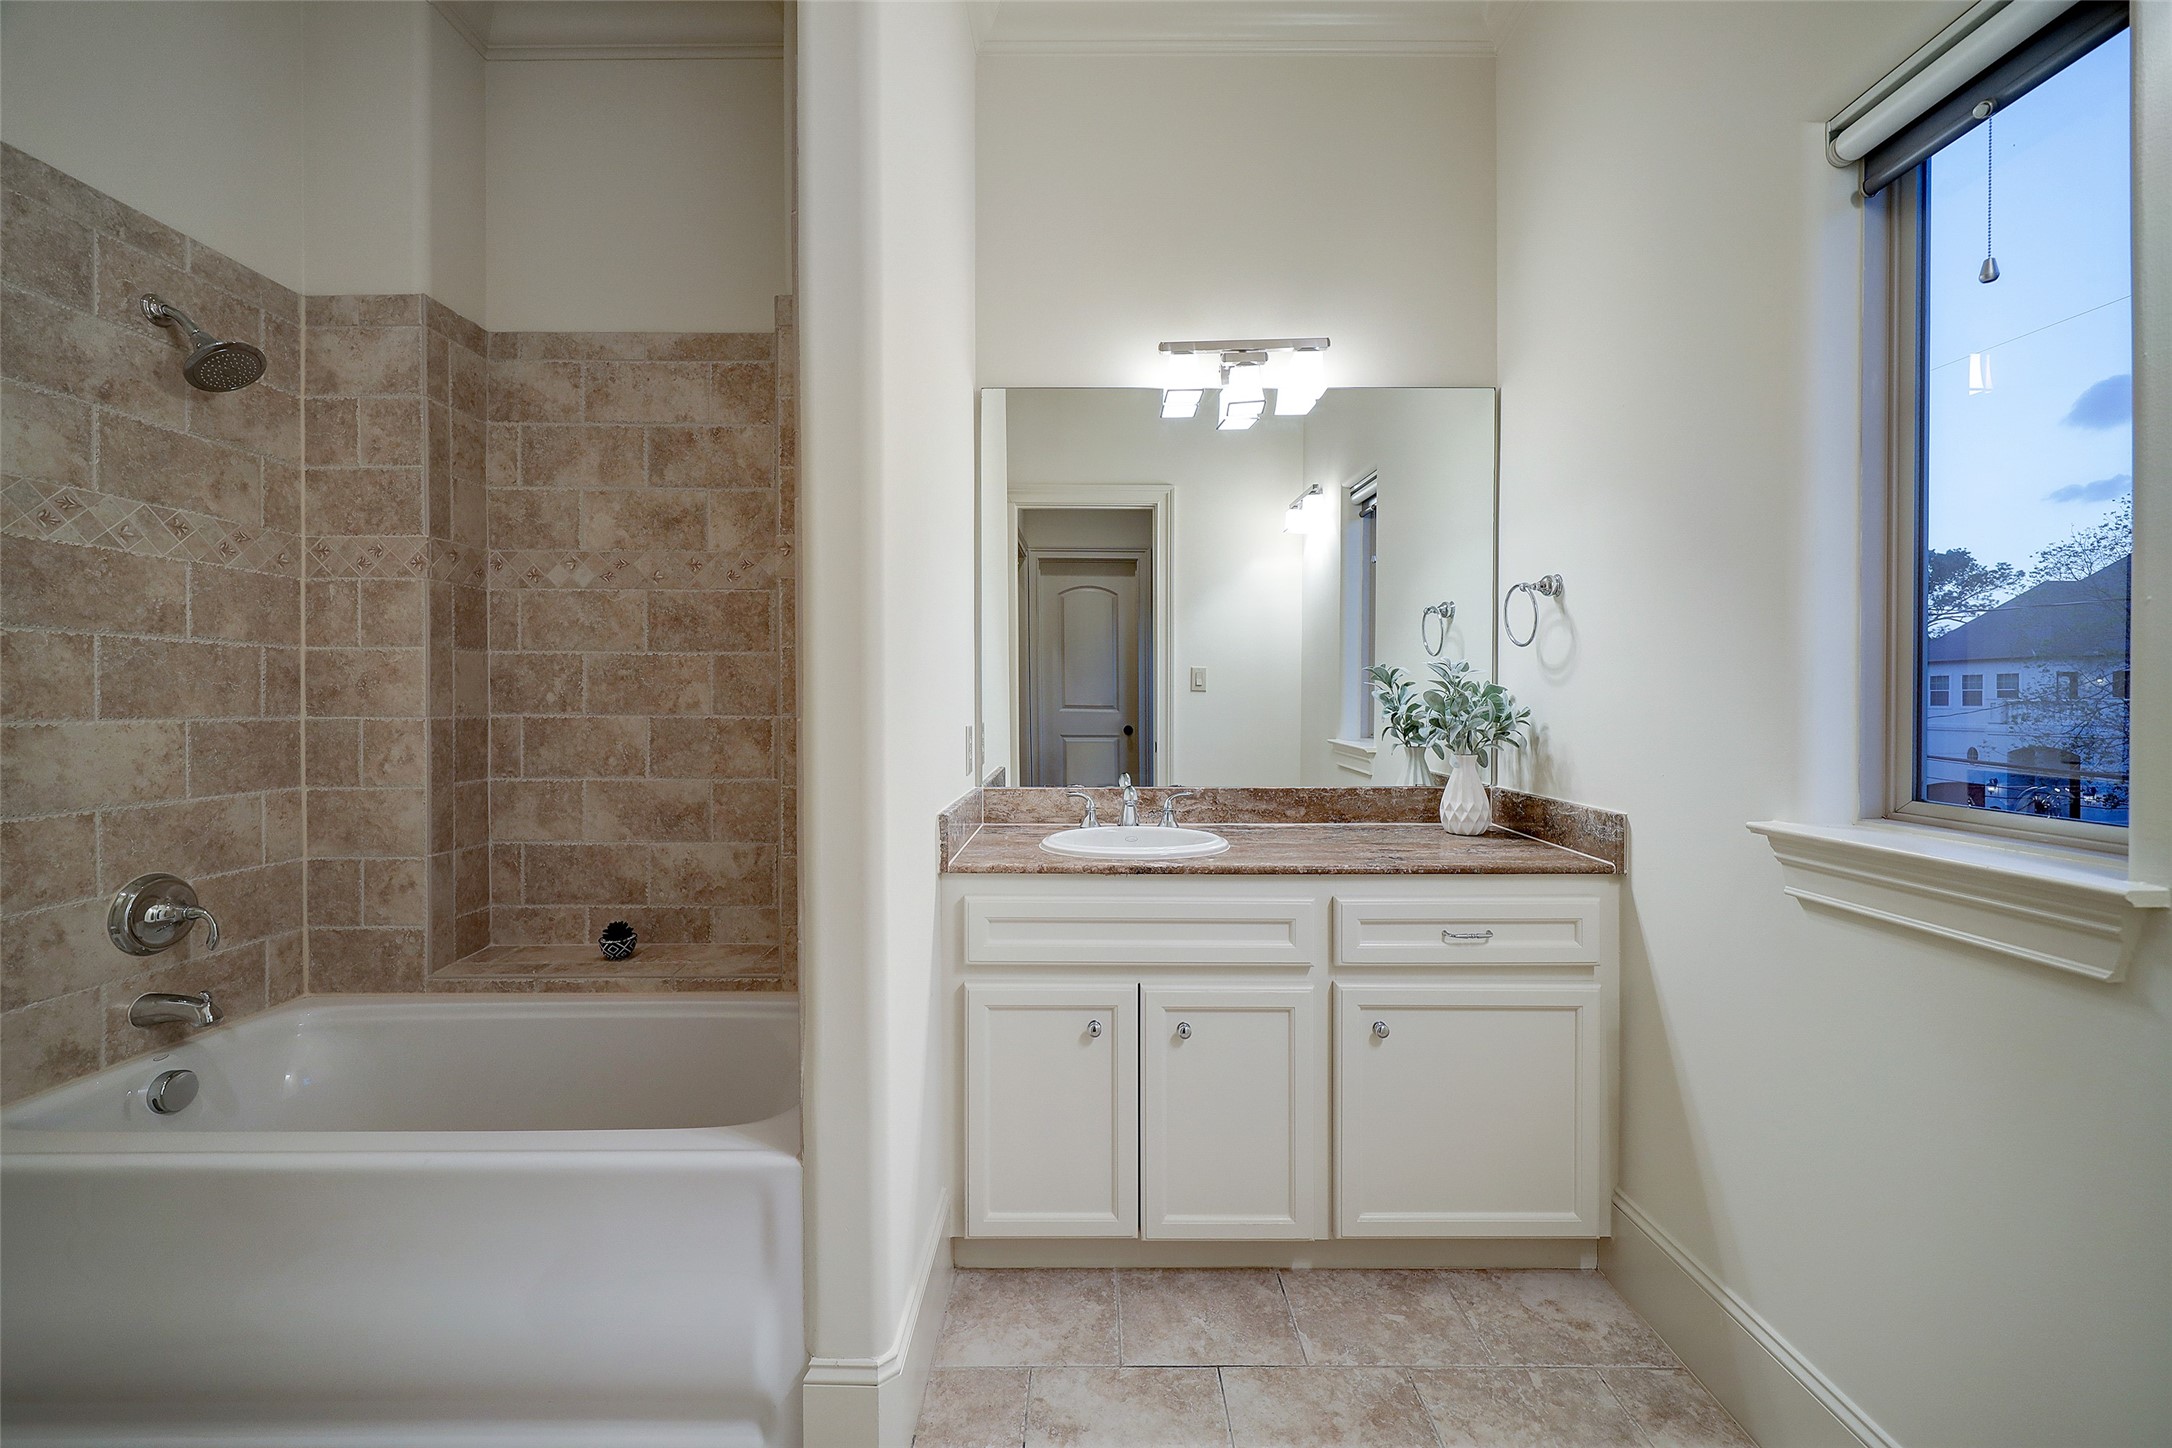 Oversized shower for two - If you have additional questions regarding 2016 W 14th  in Houston or would like to tour the property with us call 800-660-1022 and reference MLS# 98343016.